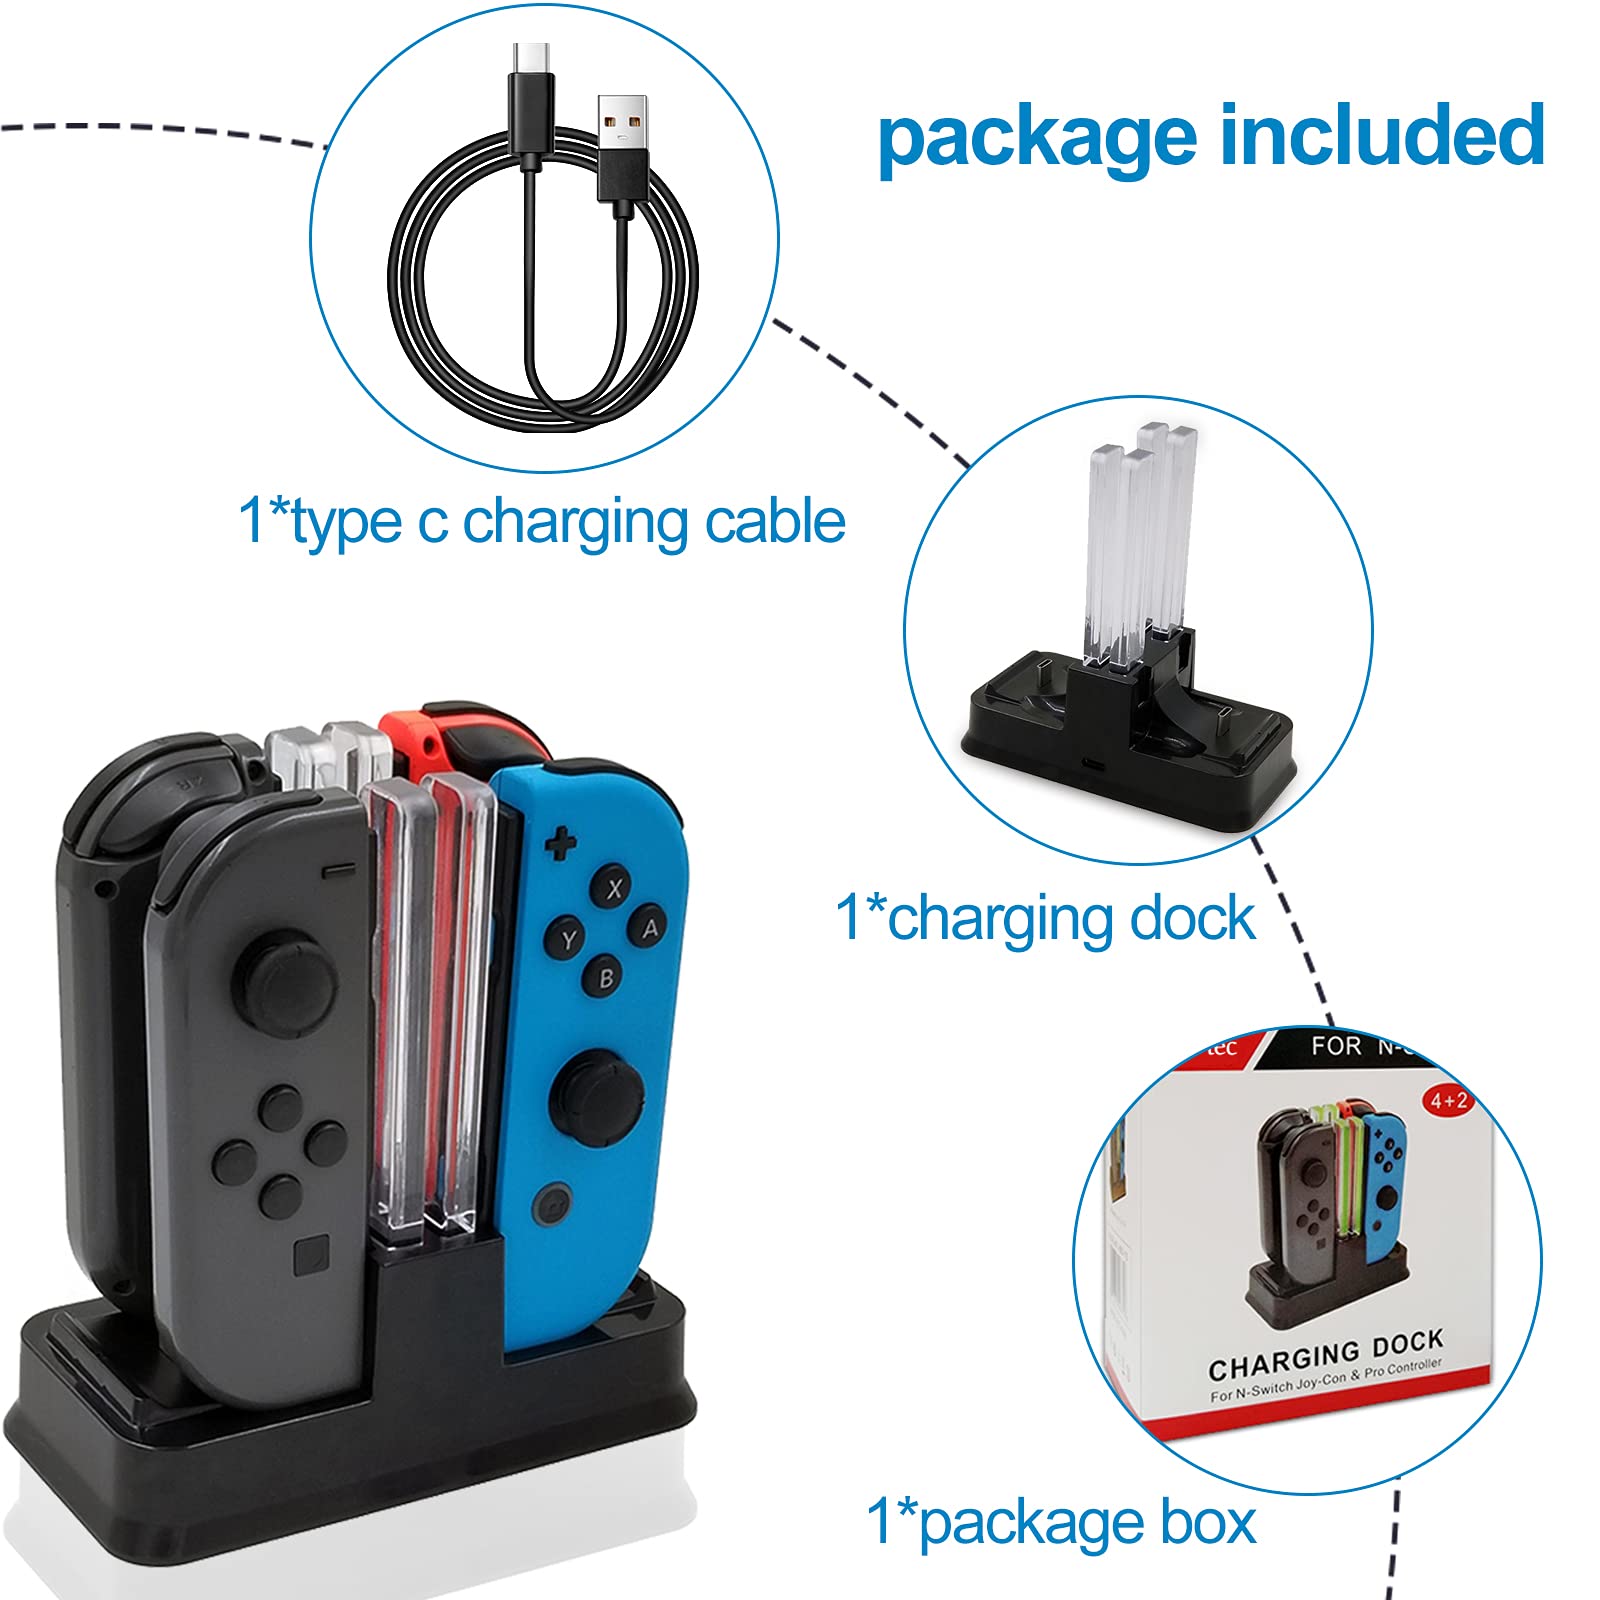 Controller Charger for Nintendo Switch, 4 in 1 Charging Dock Station Support 4 Joycon or 2 Pro Controllers to Charge simultaneously, with LED Charging ndicator and Type C Charging Cable